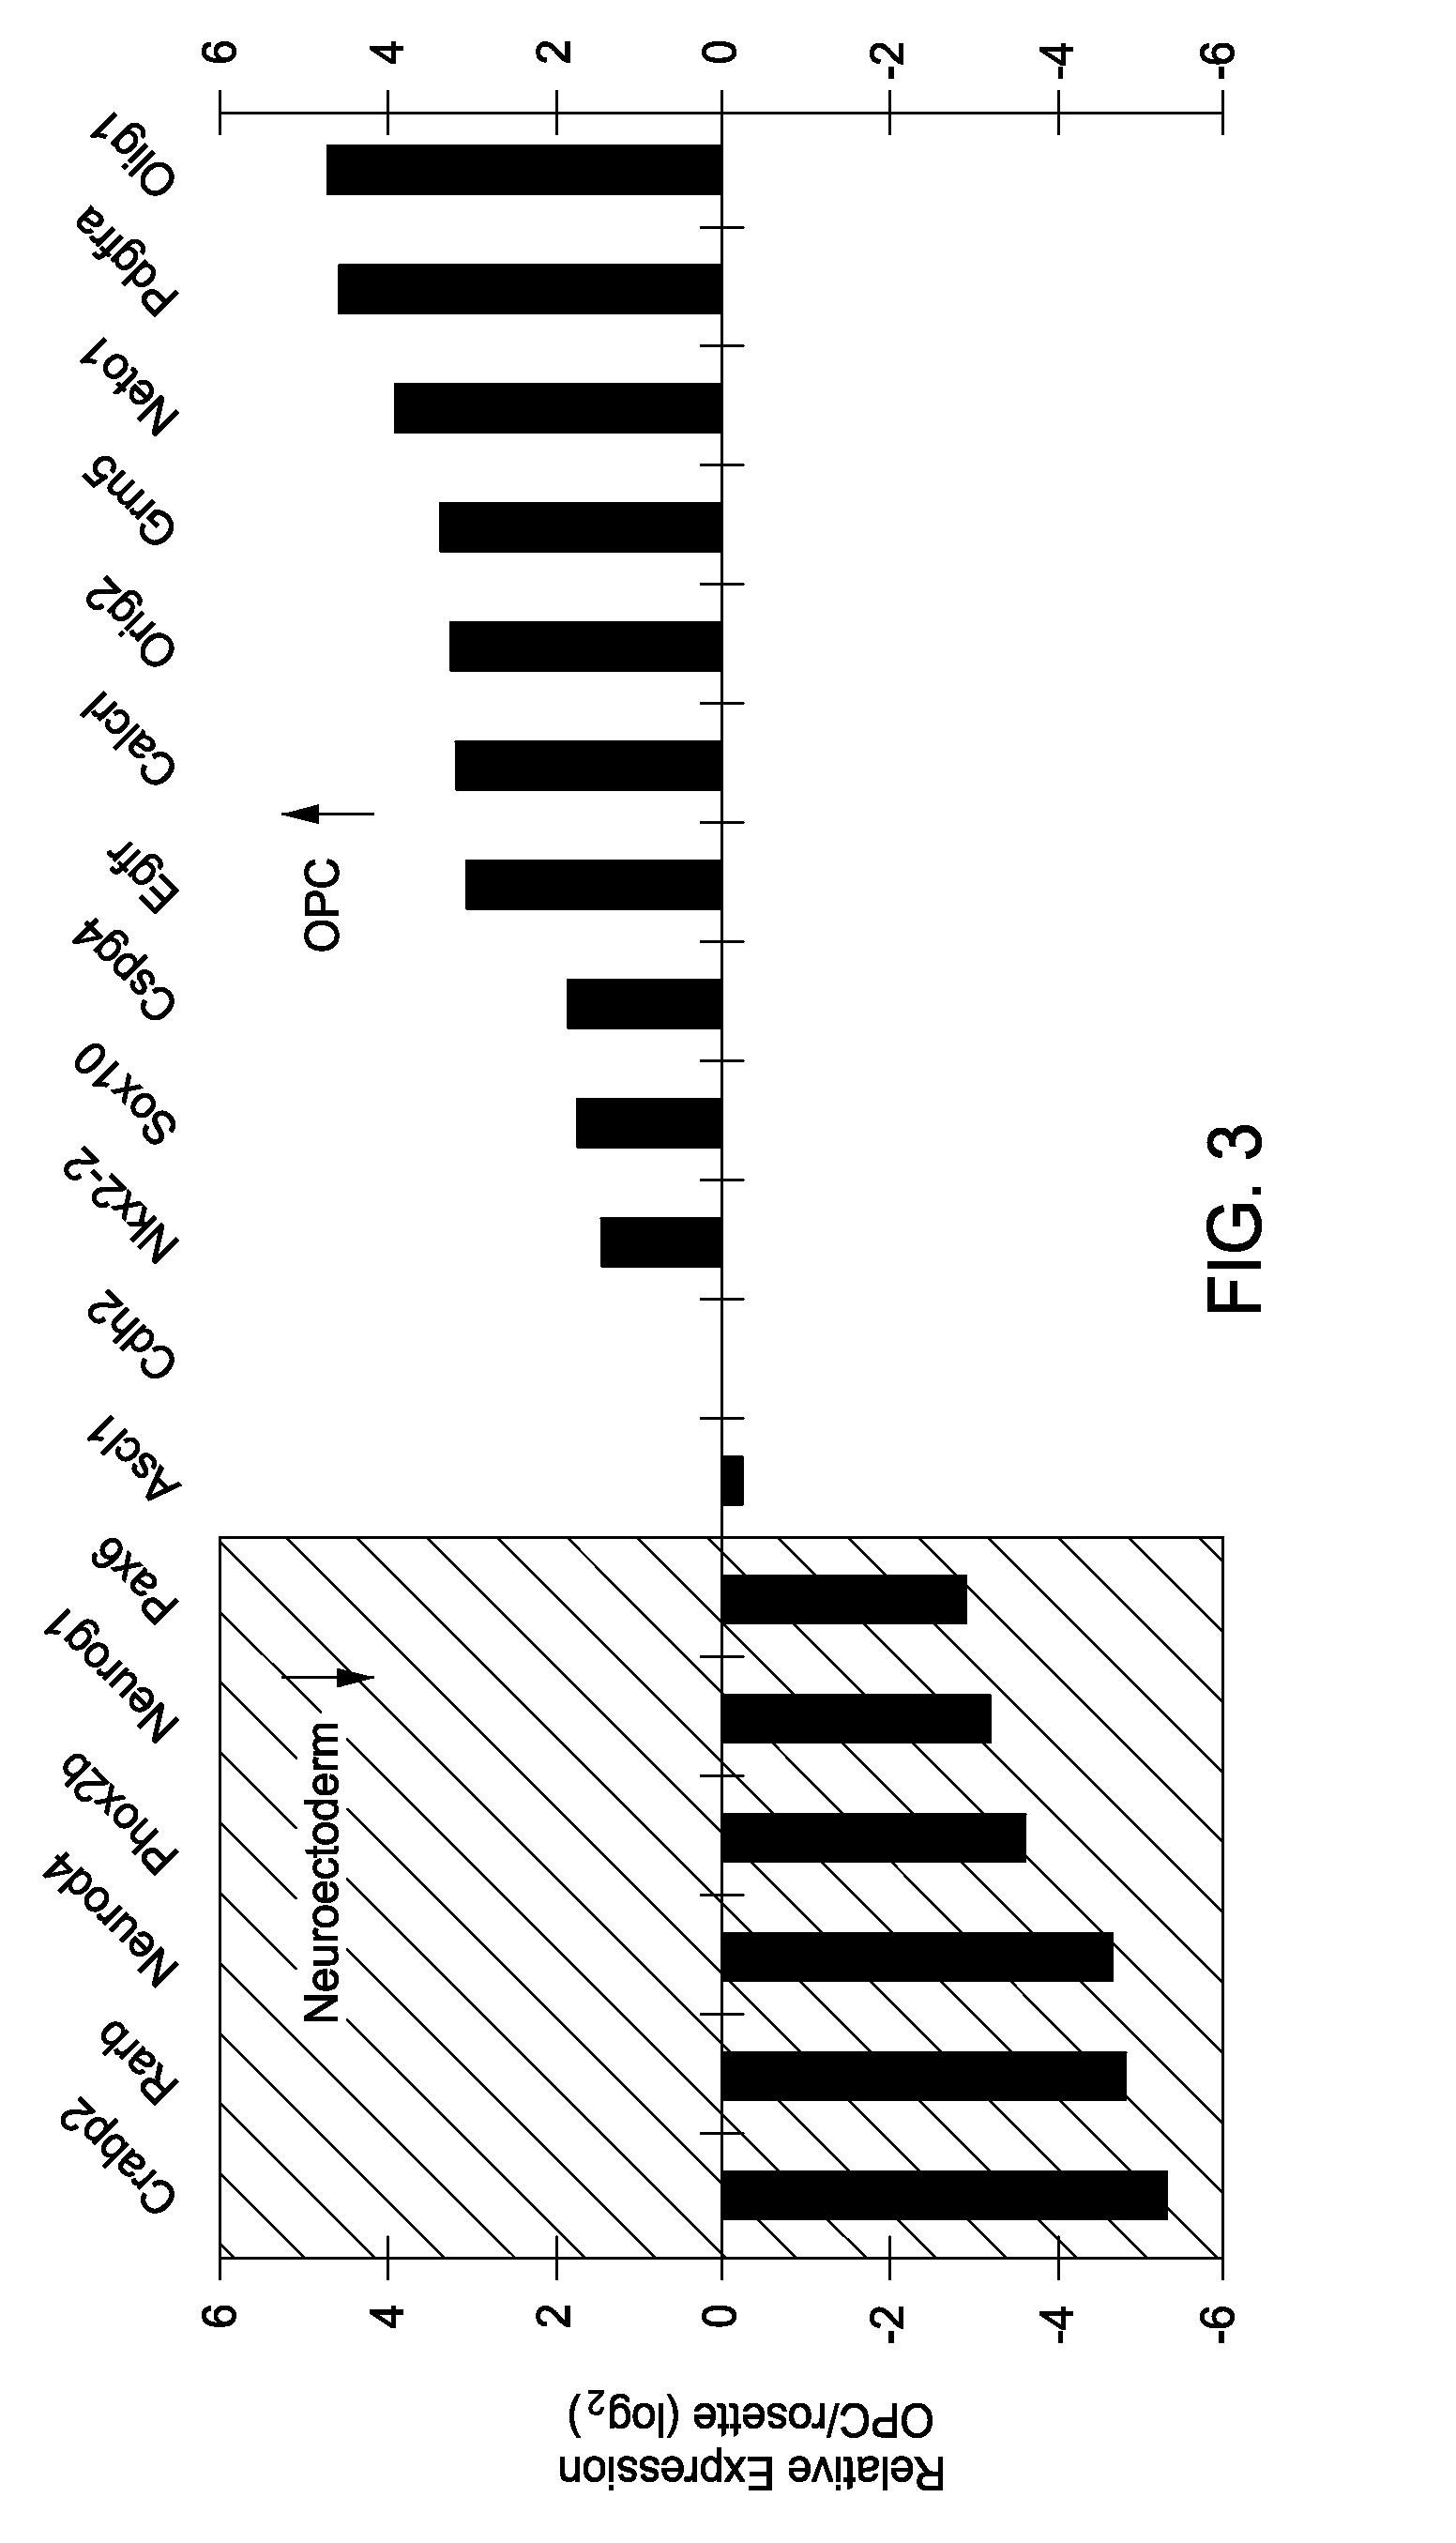 Differentiation method for production of glial cell populations